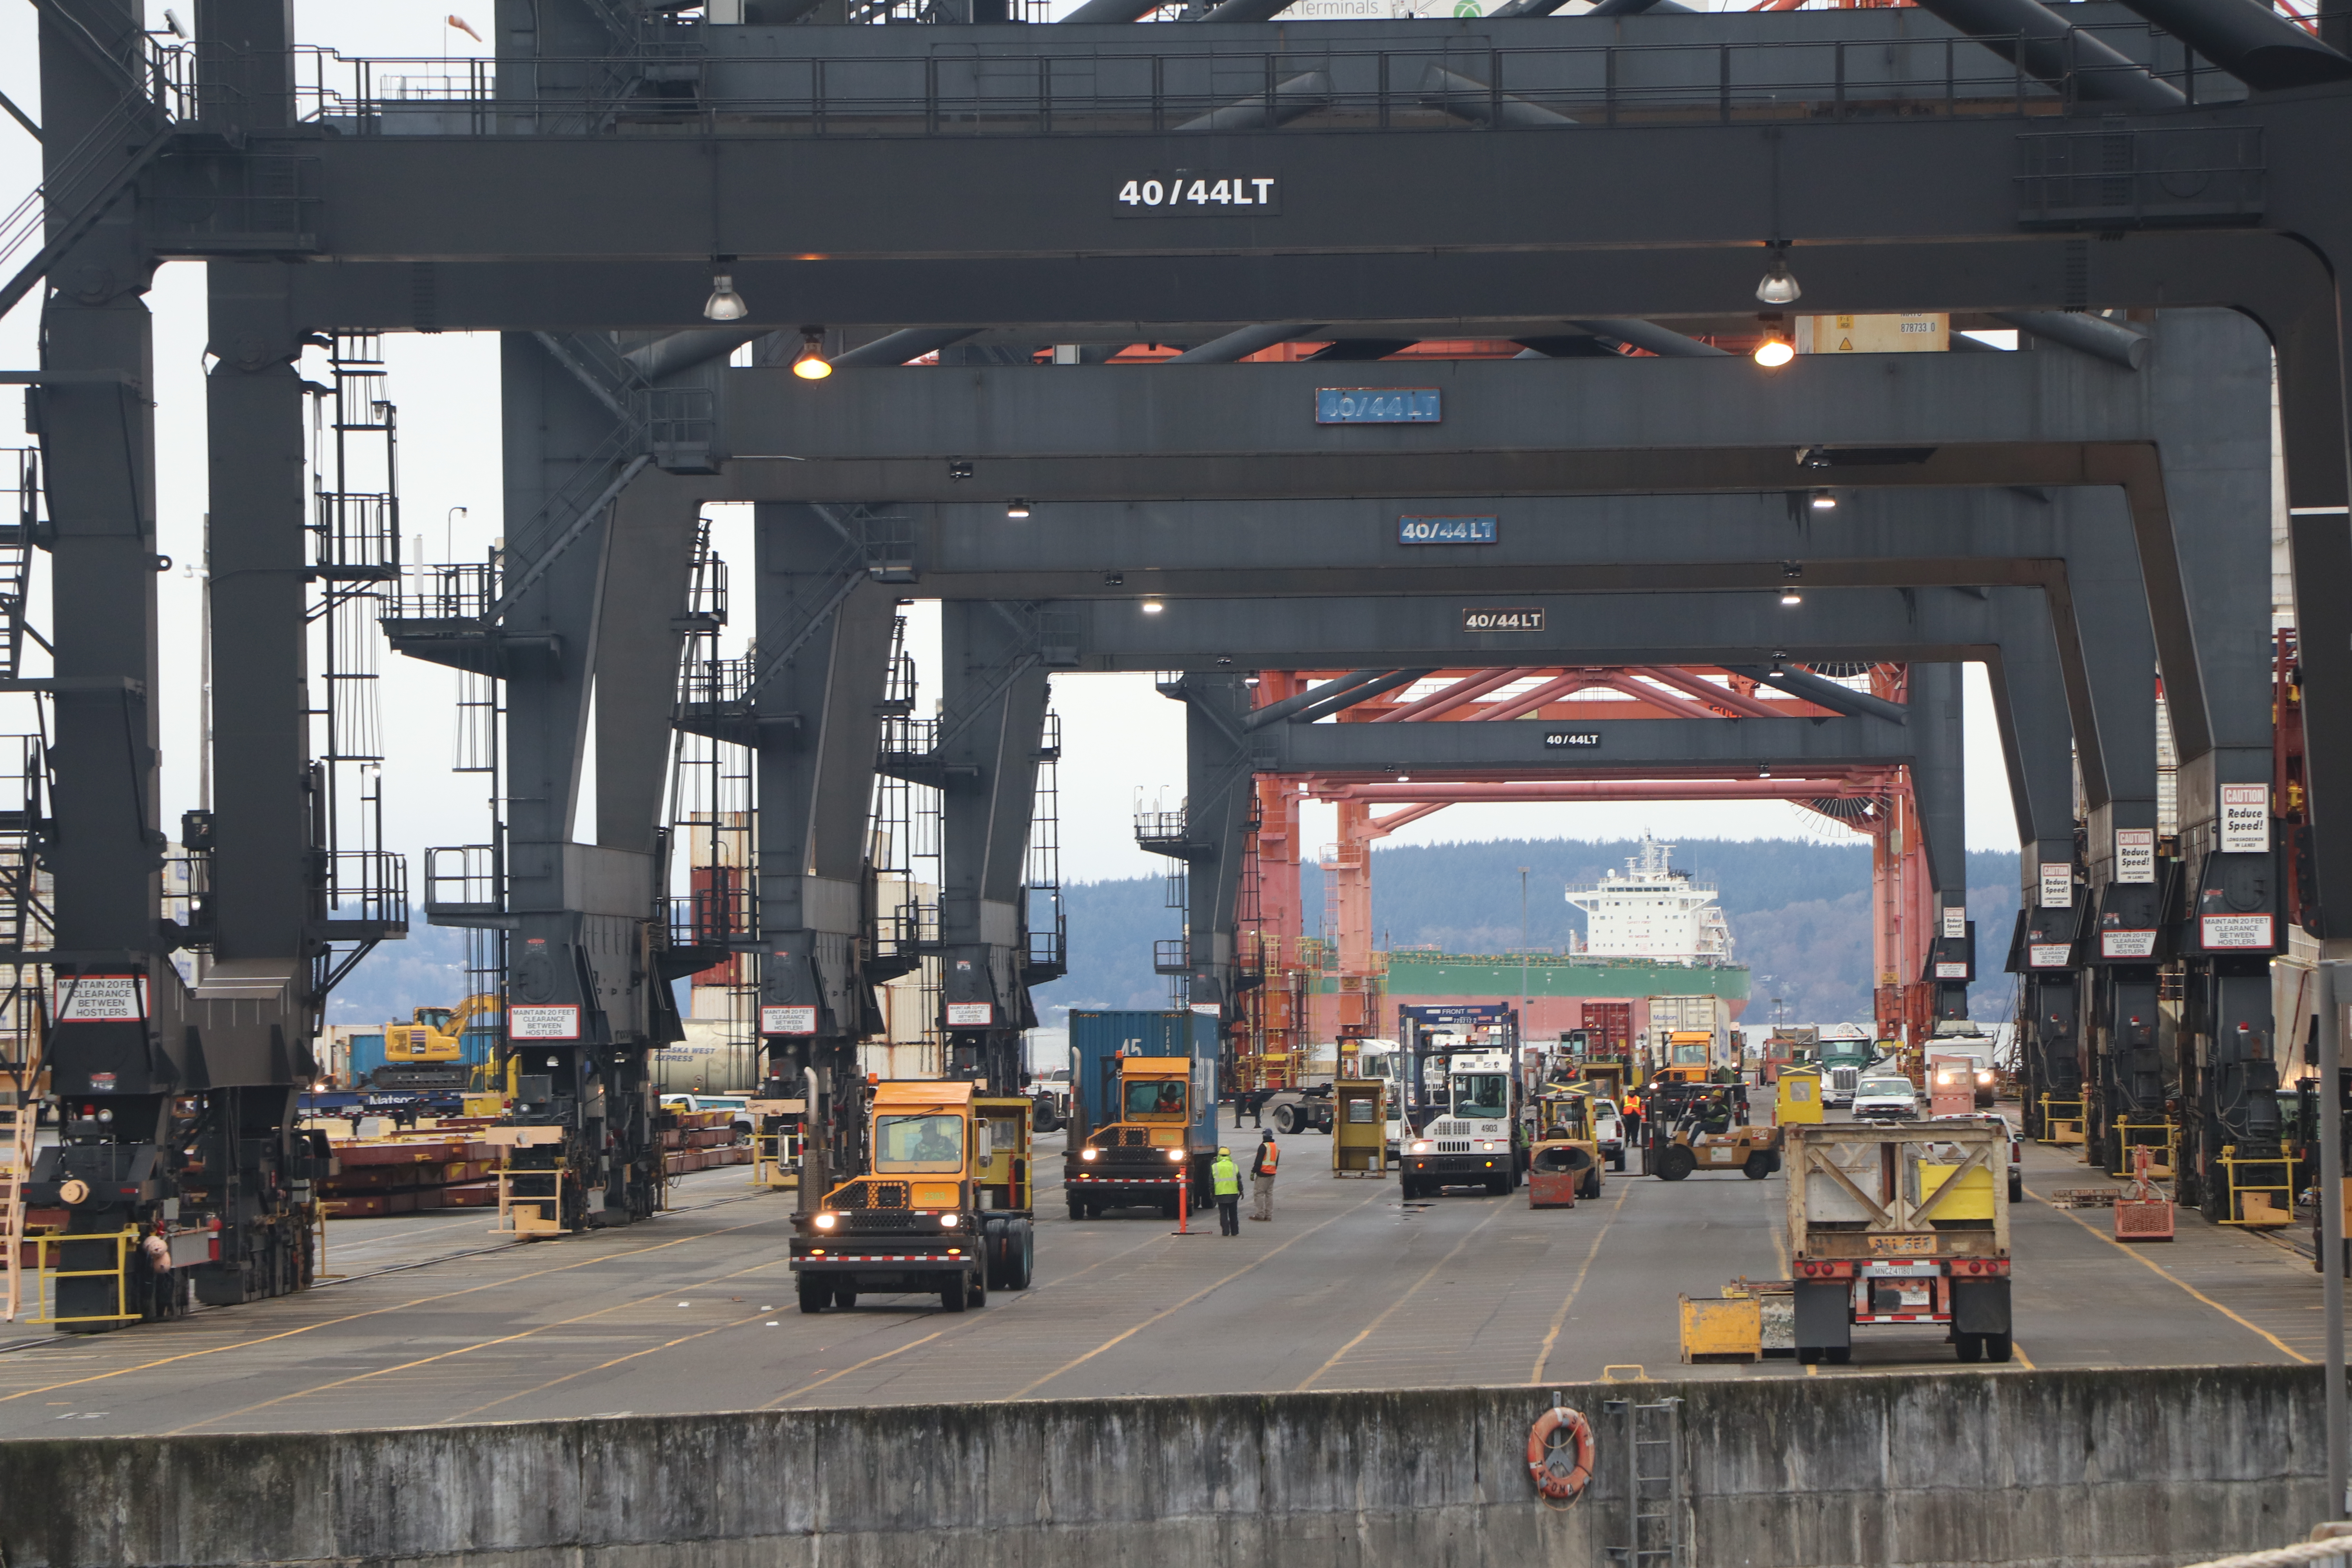 Image Showing Rail Mounted Gantry Cranes at a Port